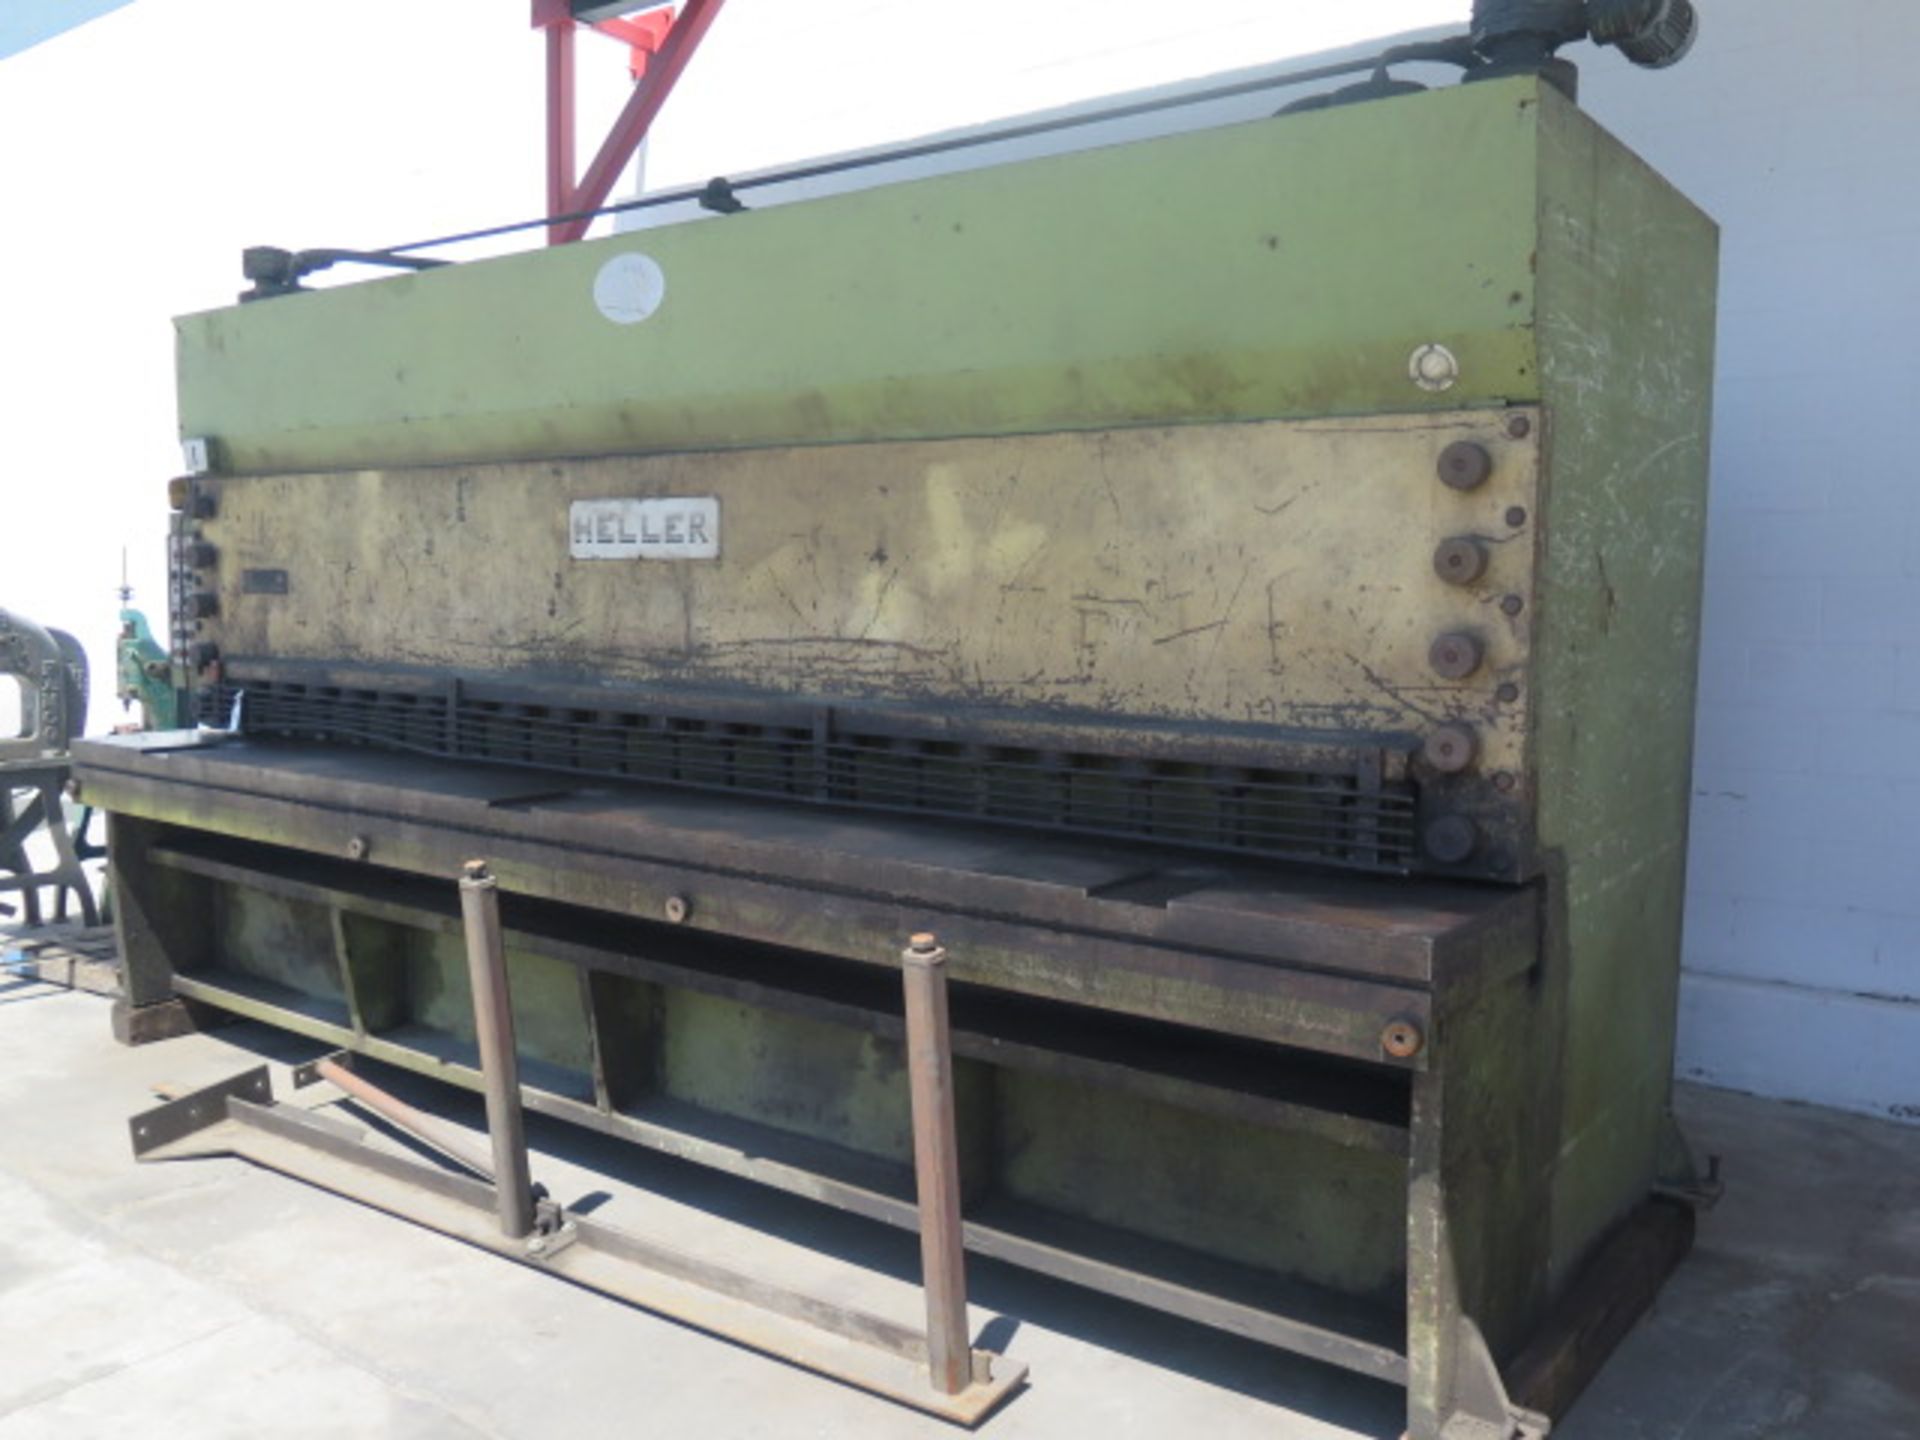 Heller HS-40-10 14’ Power Shear s/n 54686 w/ 36” Controlled Back Gage, Squaring Arm, Front Supports - Image 3 of 9